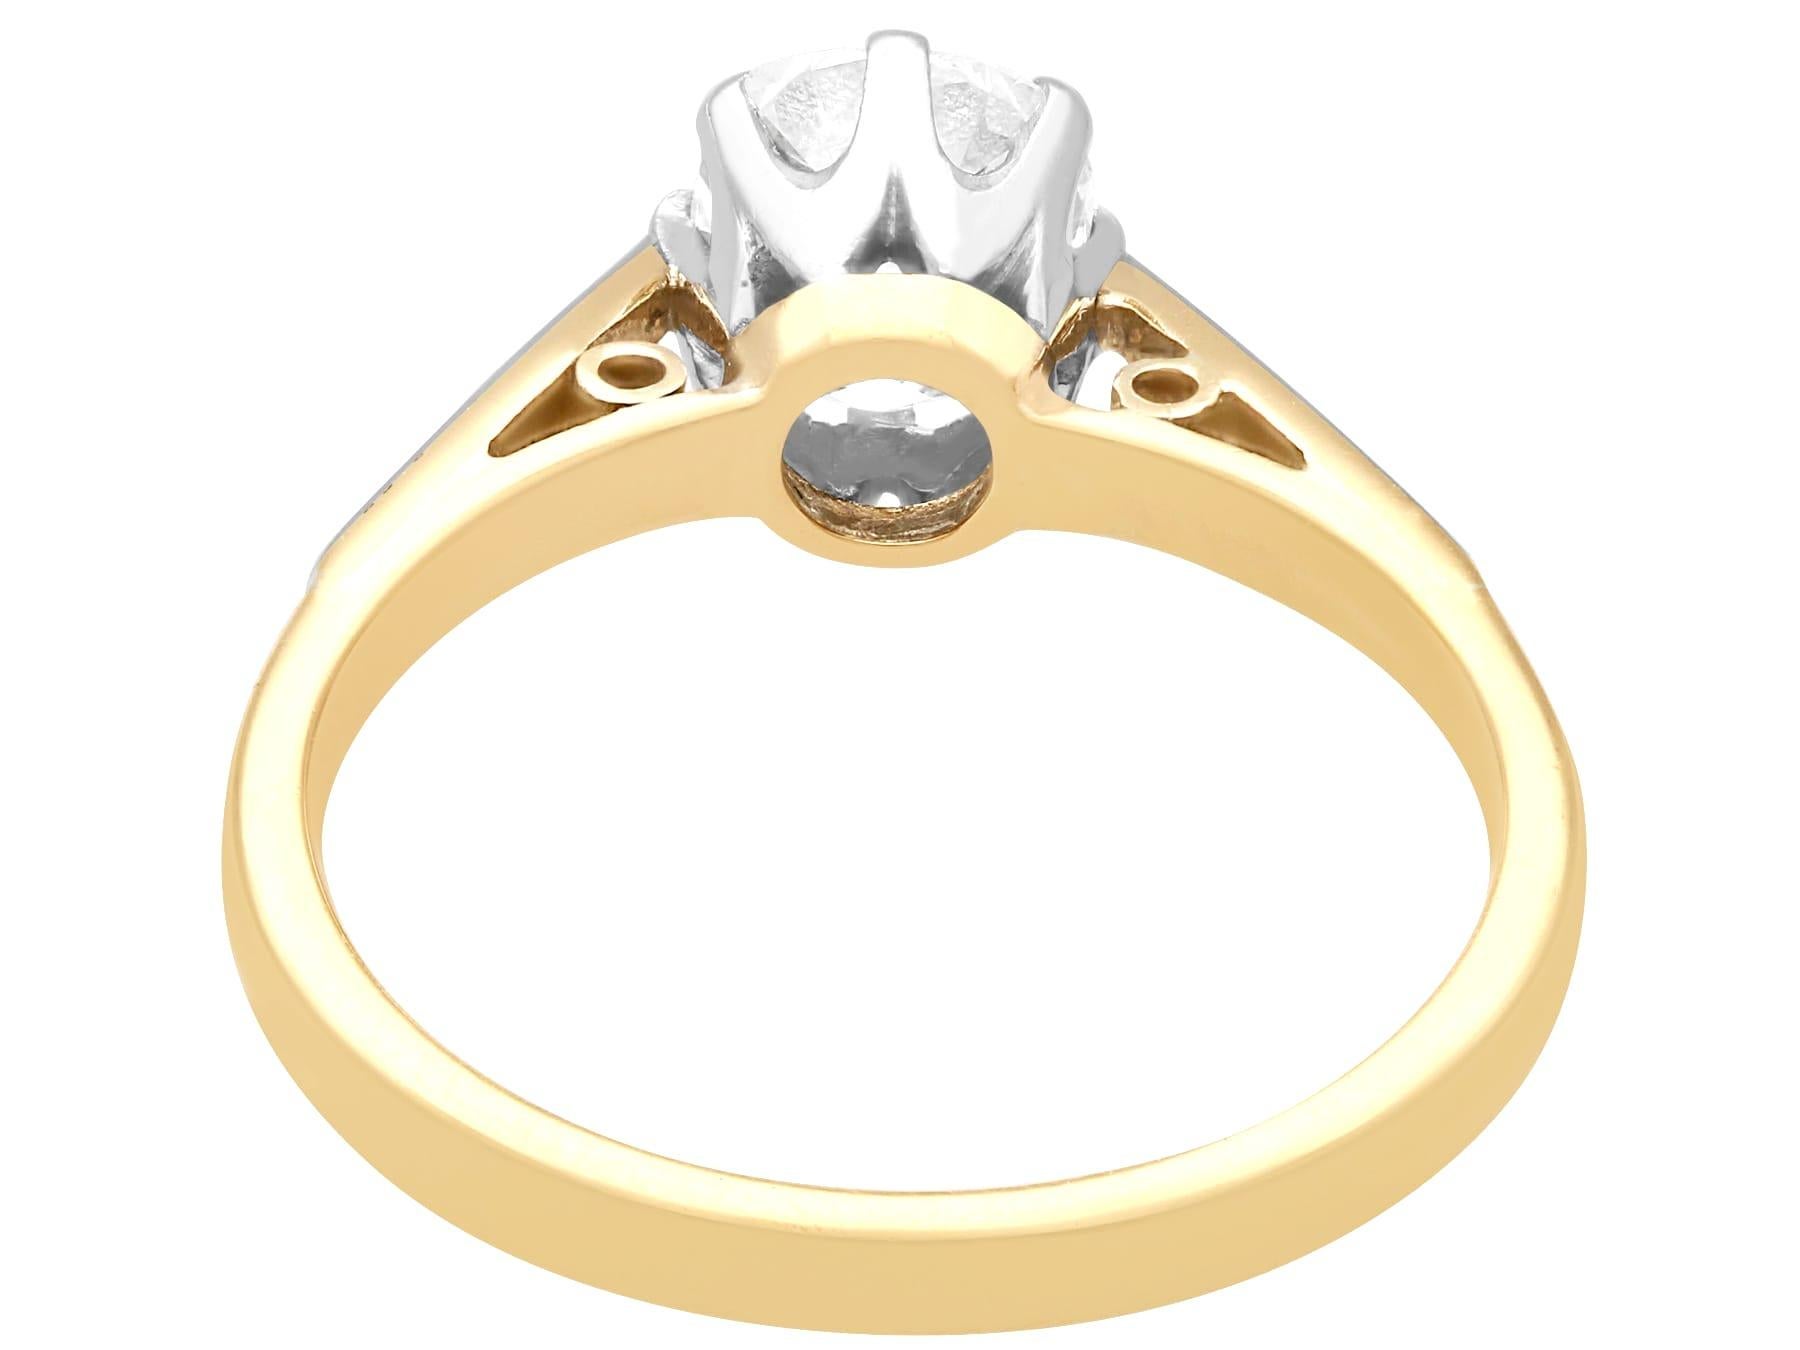 Women's or Men's Antique 1.23 Carat Diamond and 18k Yellow Gold Solitaire Ring, circa 1910 For Sale